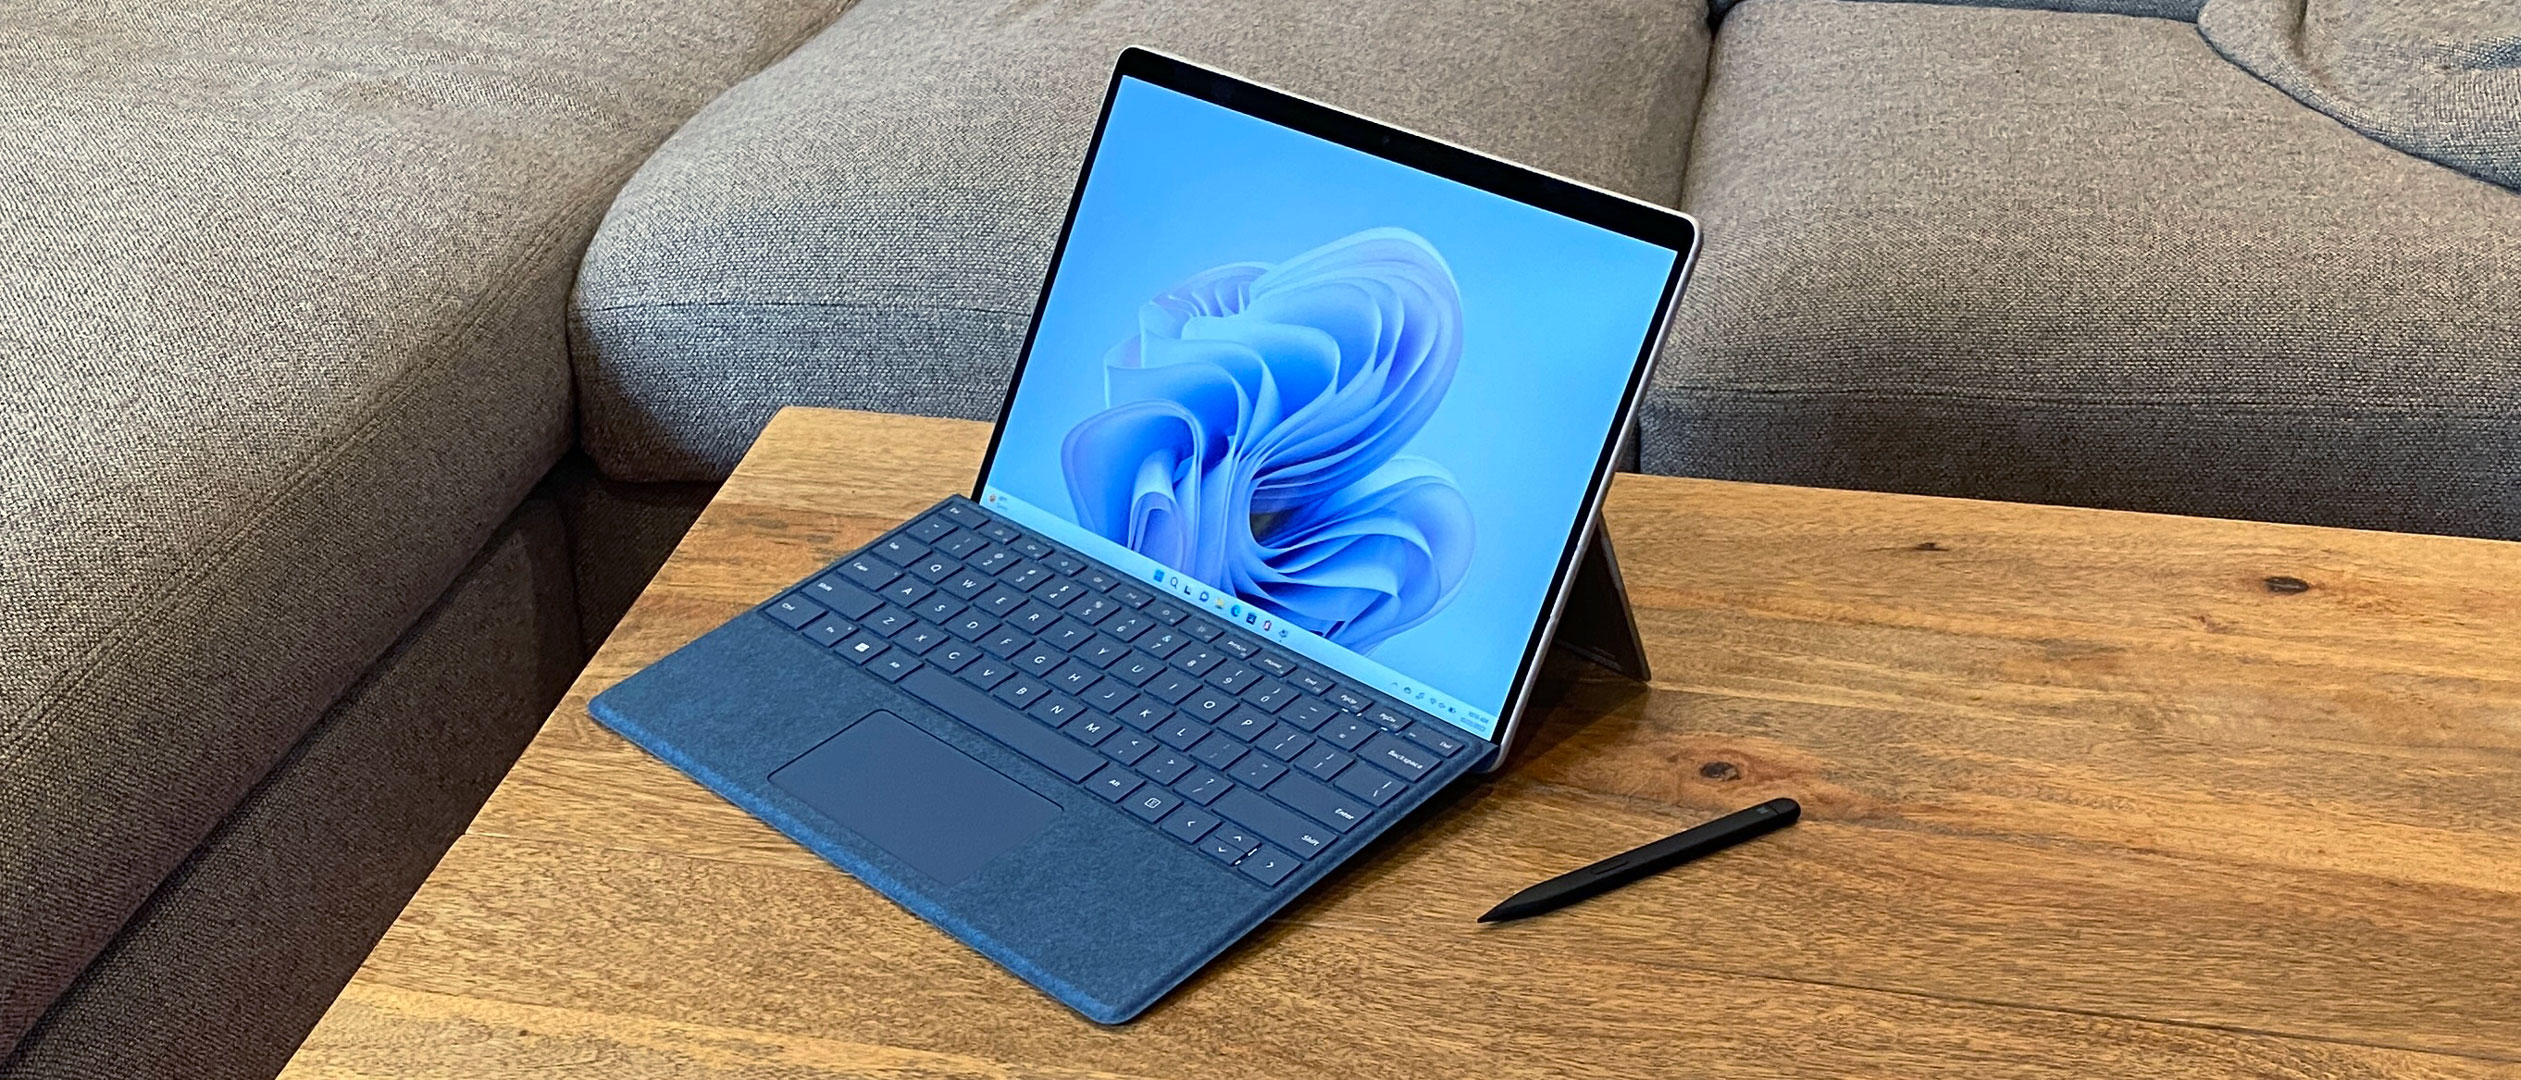 Microsoft Surface Pro 9 (5G) review: An Arm tablet worth buying